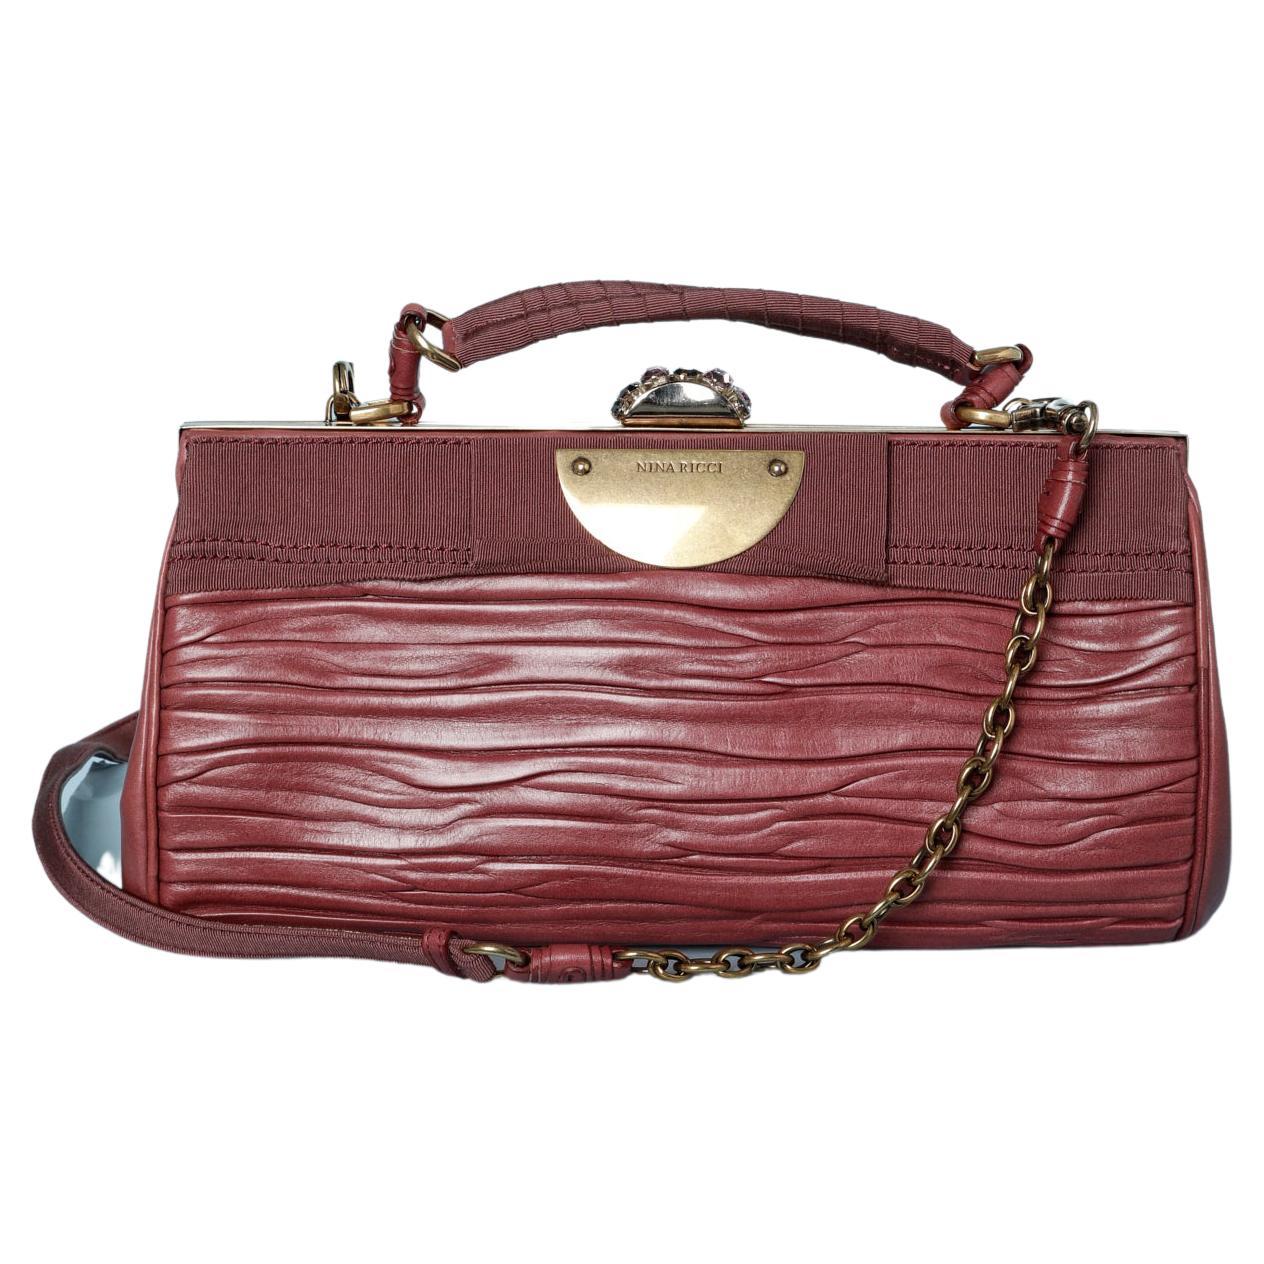 Rose wood color pleated leather and gros-grain shoulder bag Nina Ricci 